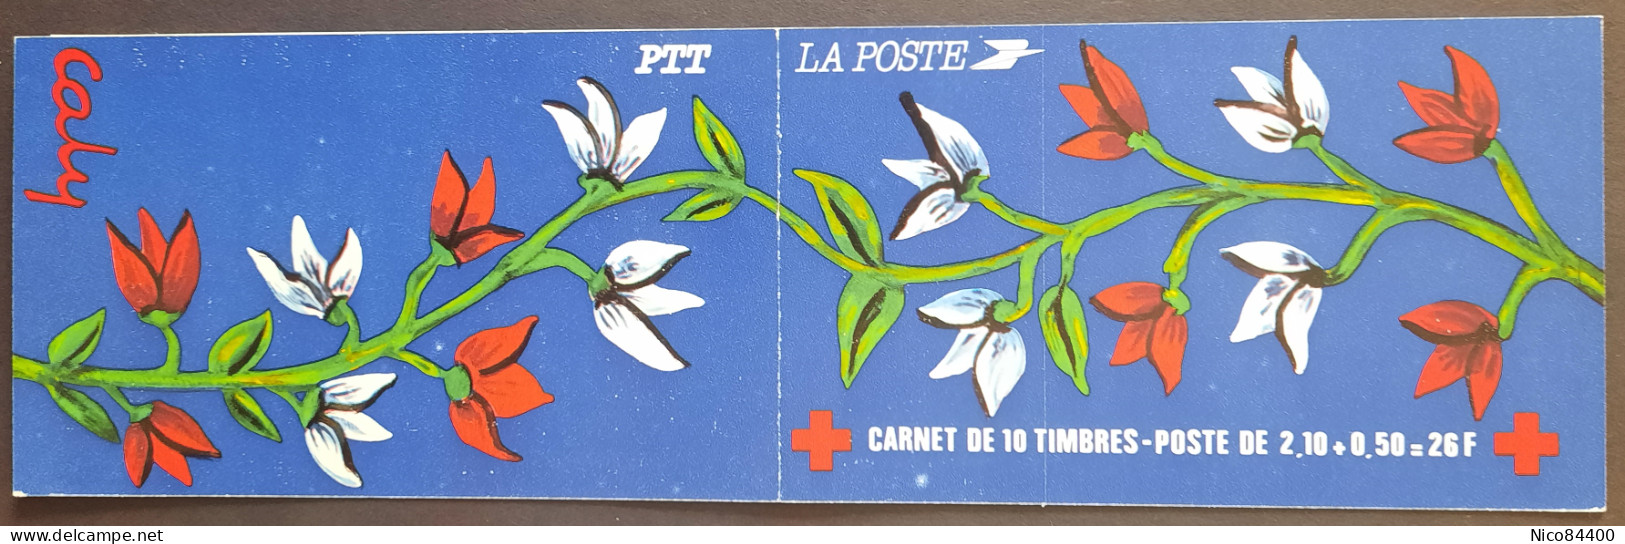 France - Carnet Croix-Rouge - 1984 - Y&T 2033 - Œuvre De Caly - Neuf ** - Red Cross